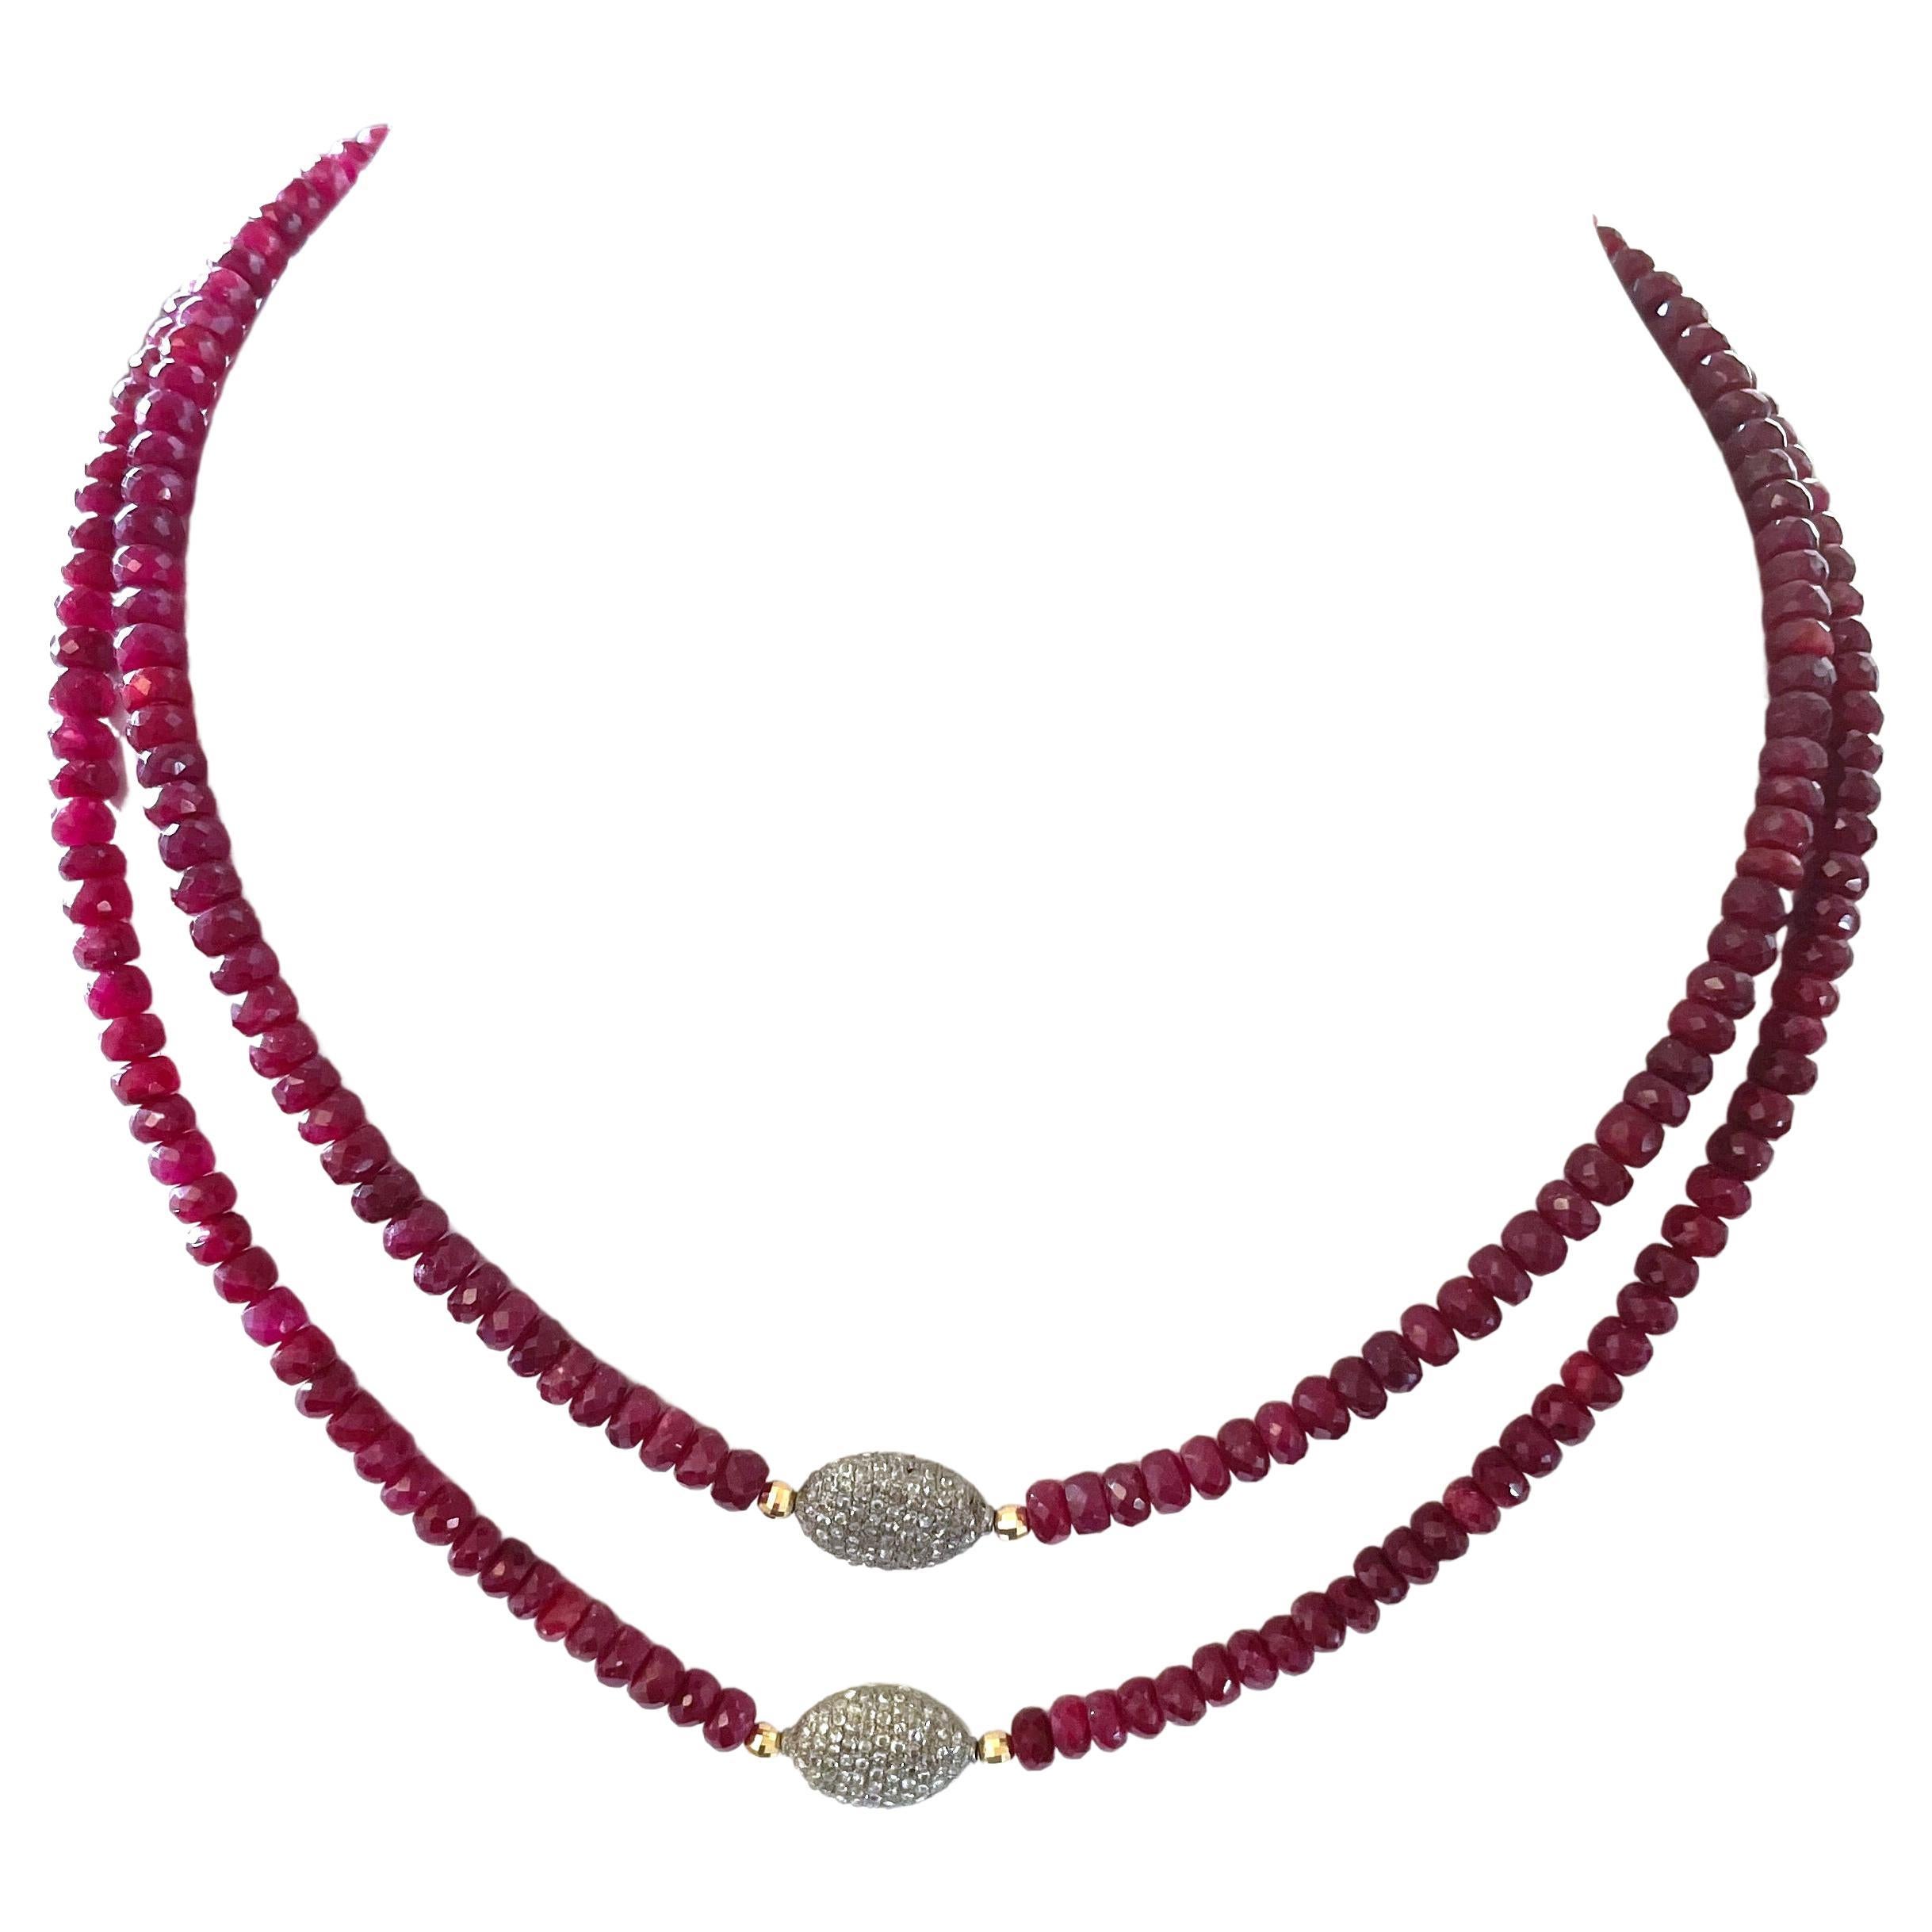 65 Carats Ruby and Pave Diamond Centerpiece Accent Necklace